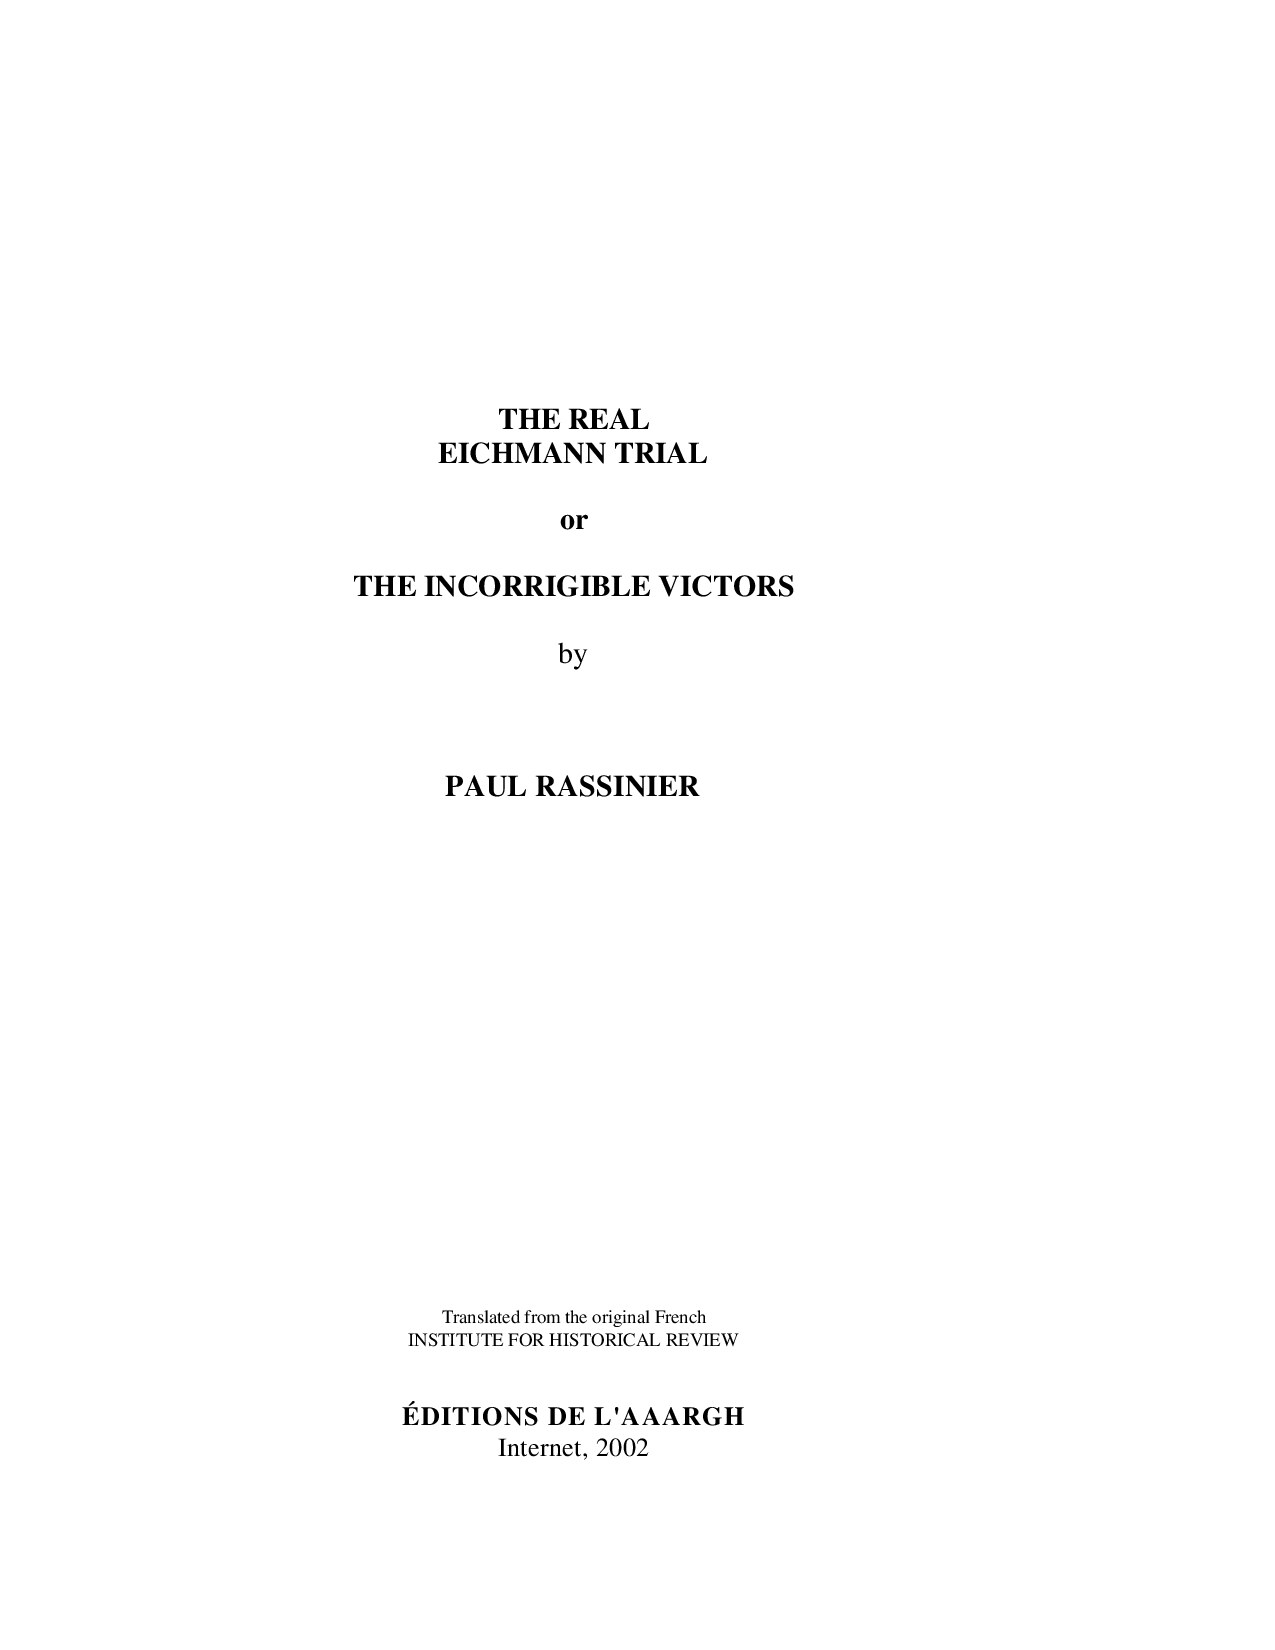 Rassinier, Paul; The Real Eichmann Trial or The Incorrigible Victors